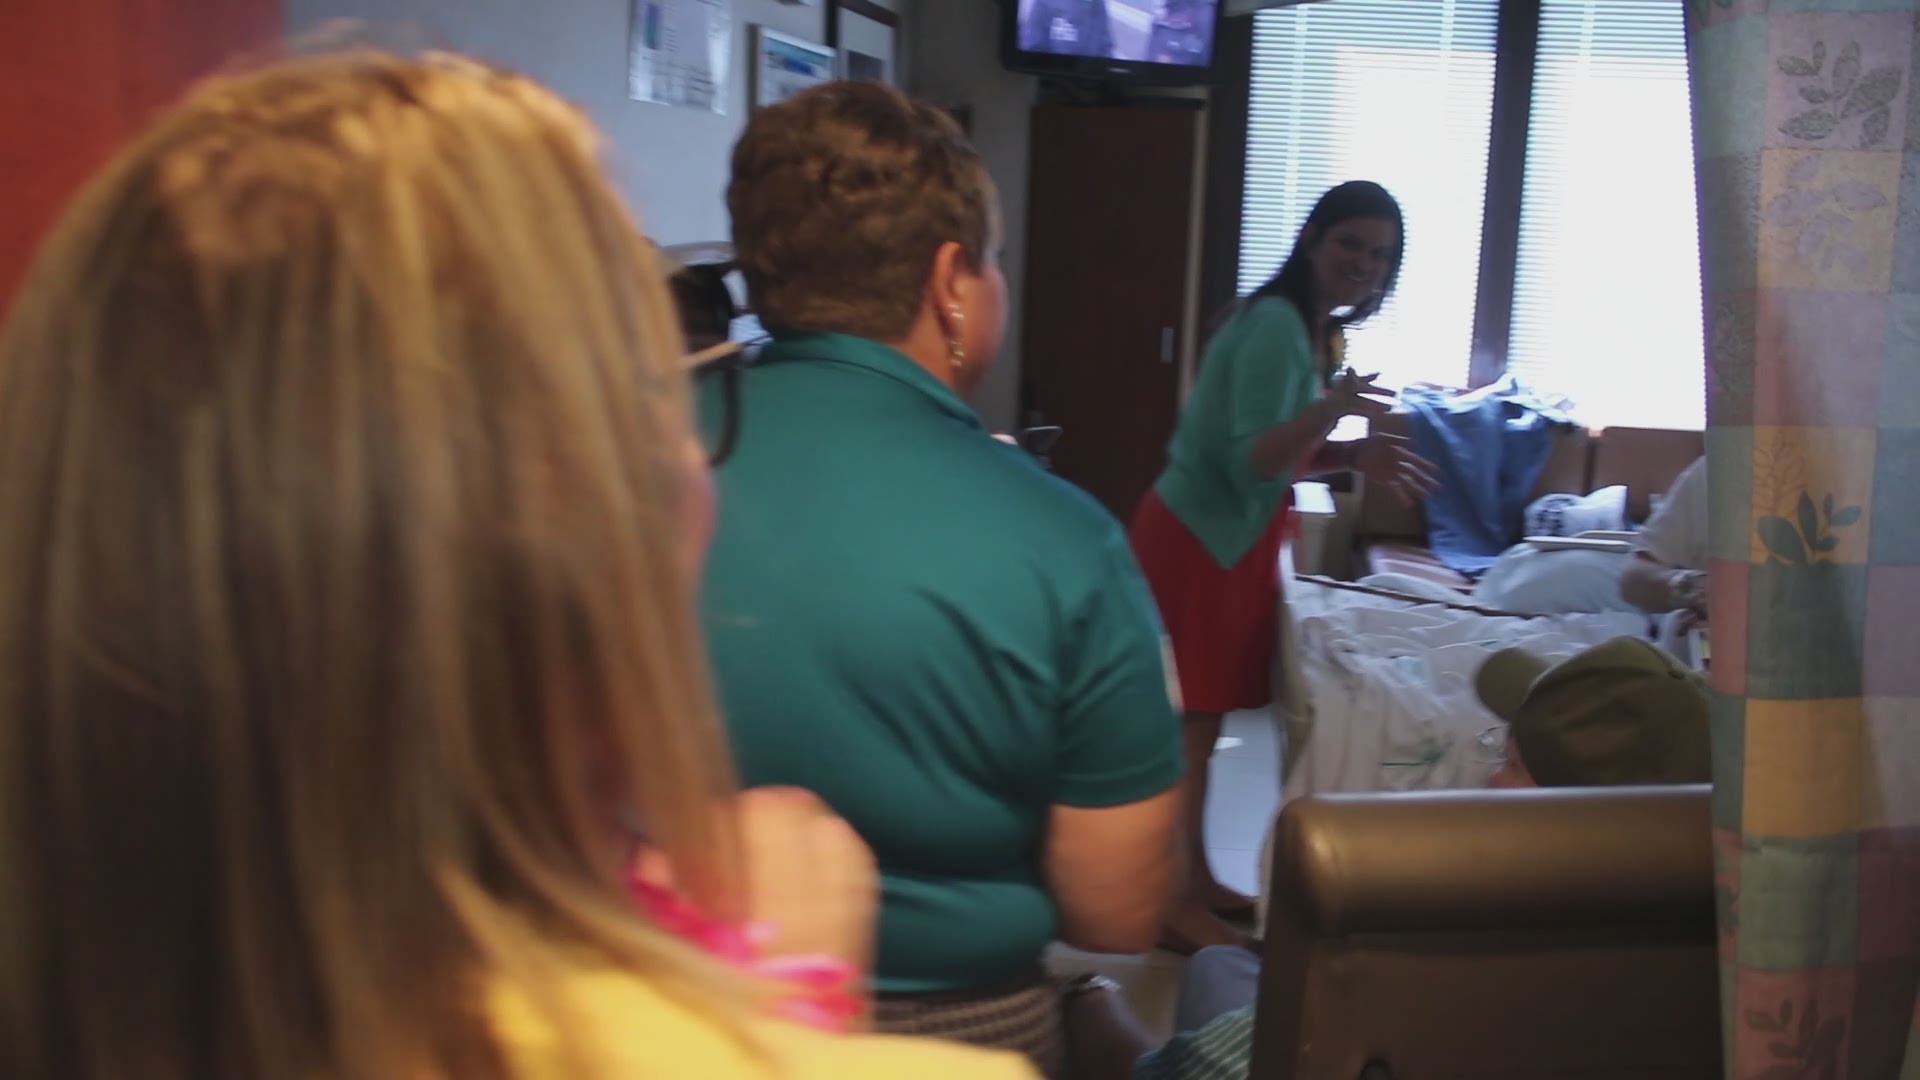 “A lot of times, people do things for the children, but the adults don’t have special stuff like that. But in reality, they love it just as much,” said Ellie Kunath, nursing staff assistant at Atrium Health's Carolinas Medical Center.